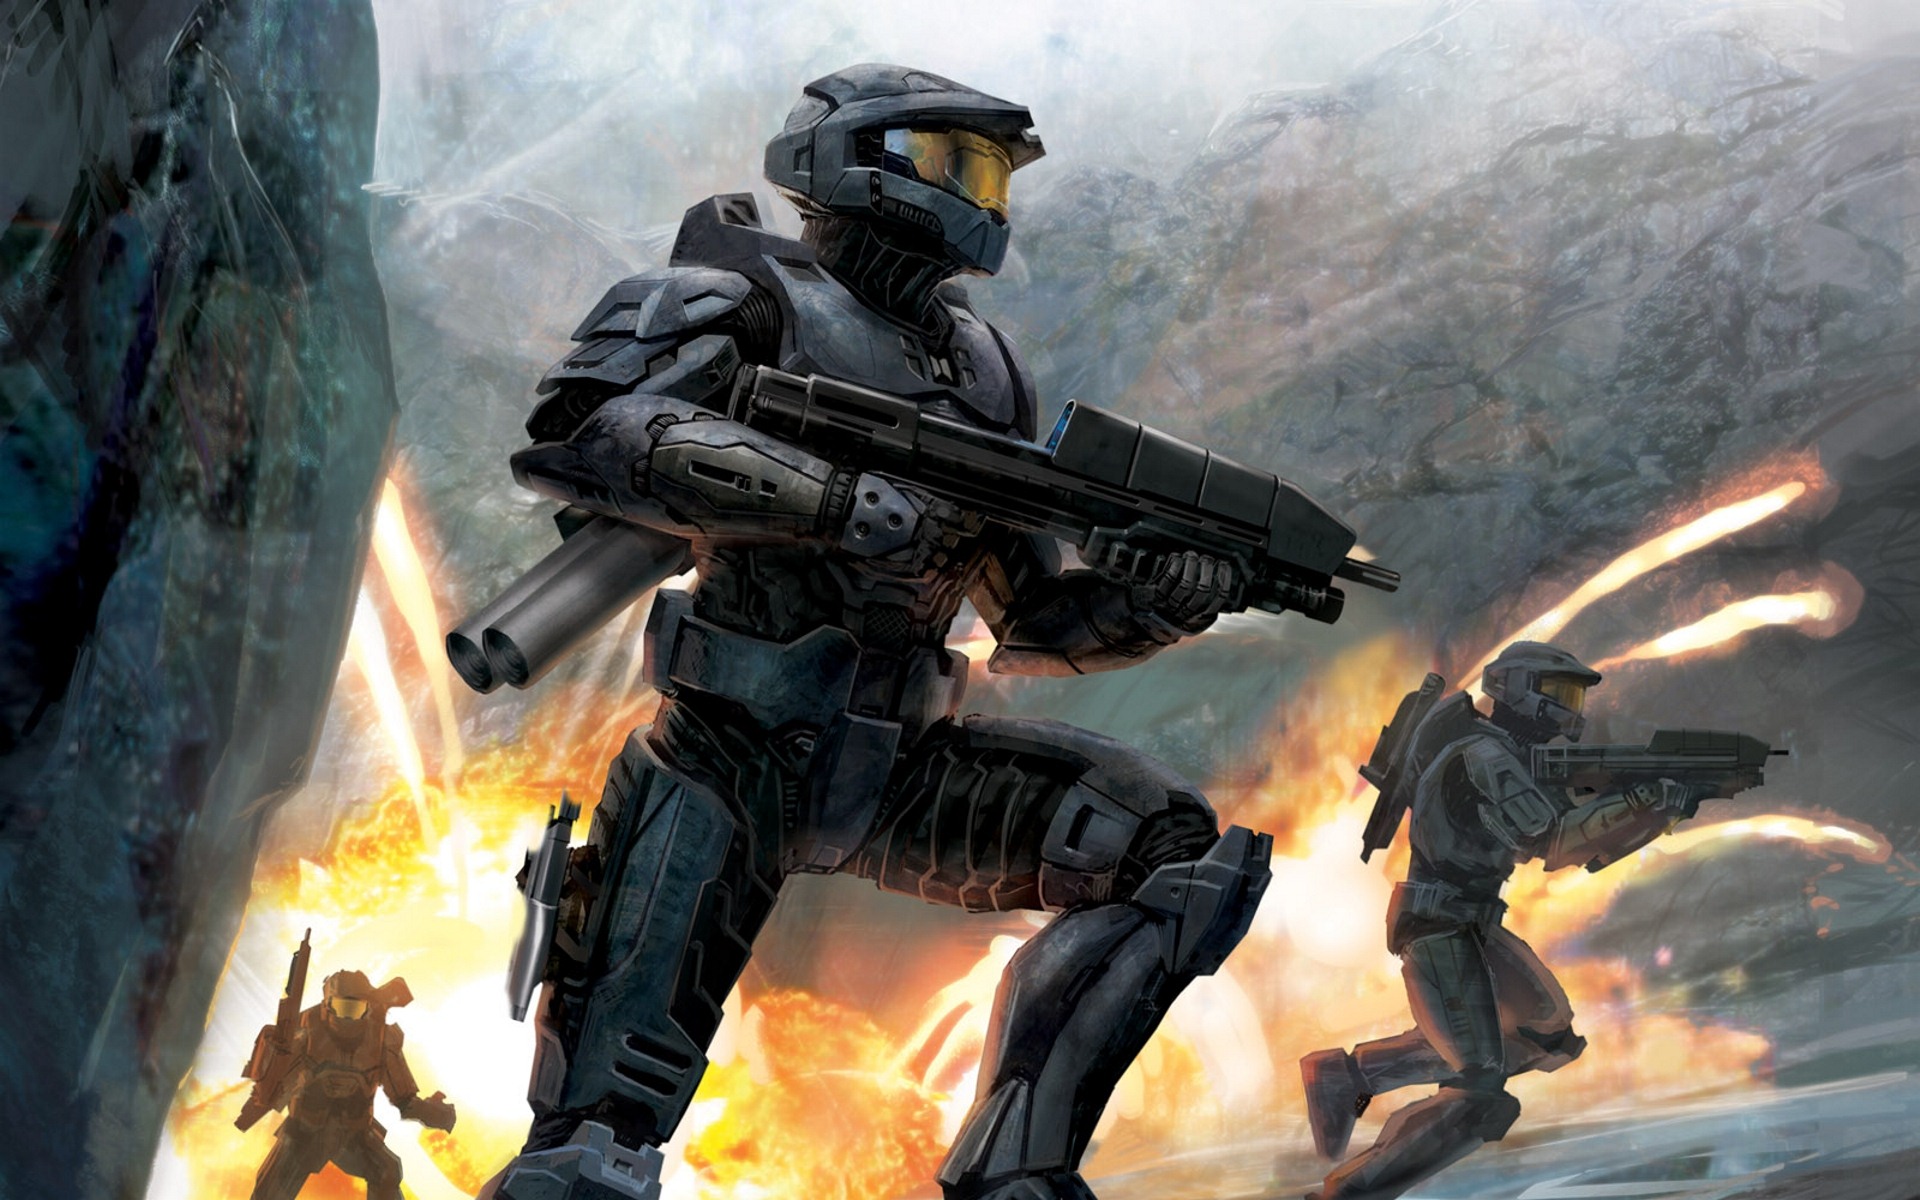 Halo game HD wallpapers #4 - 1920x1200